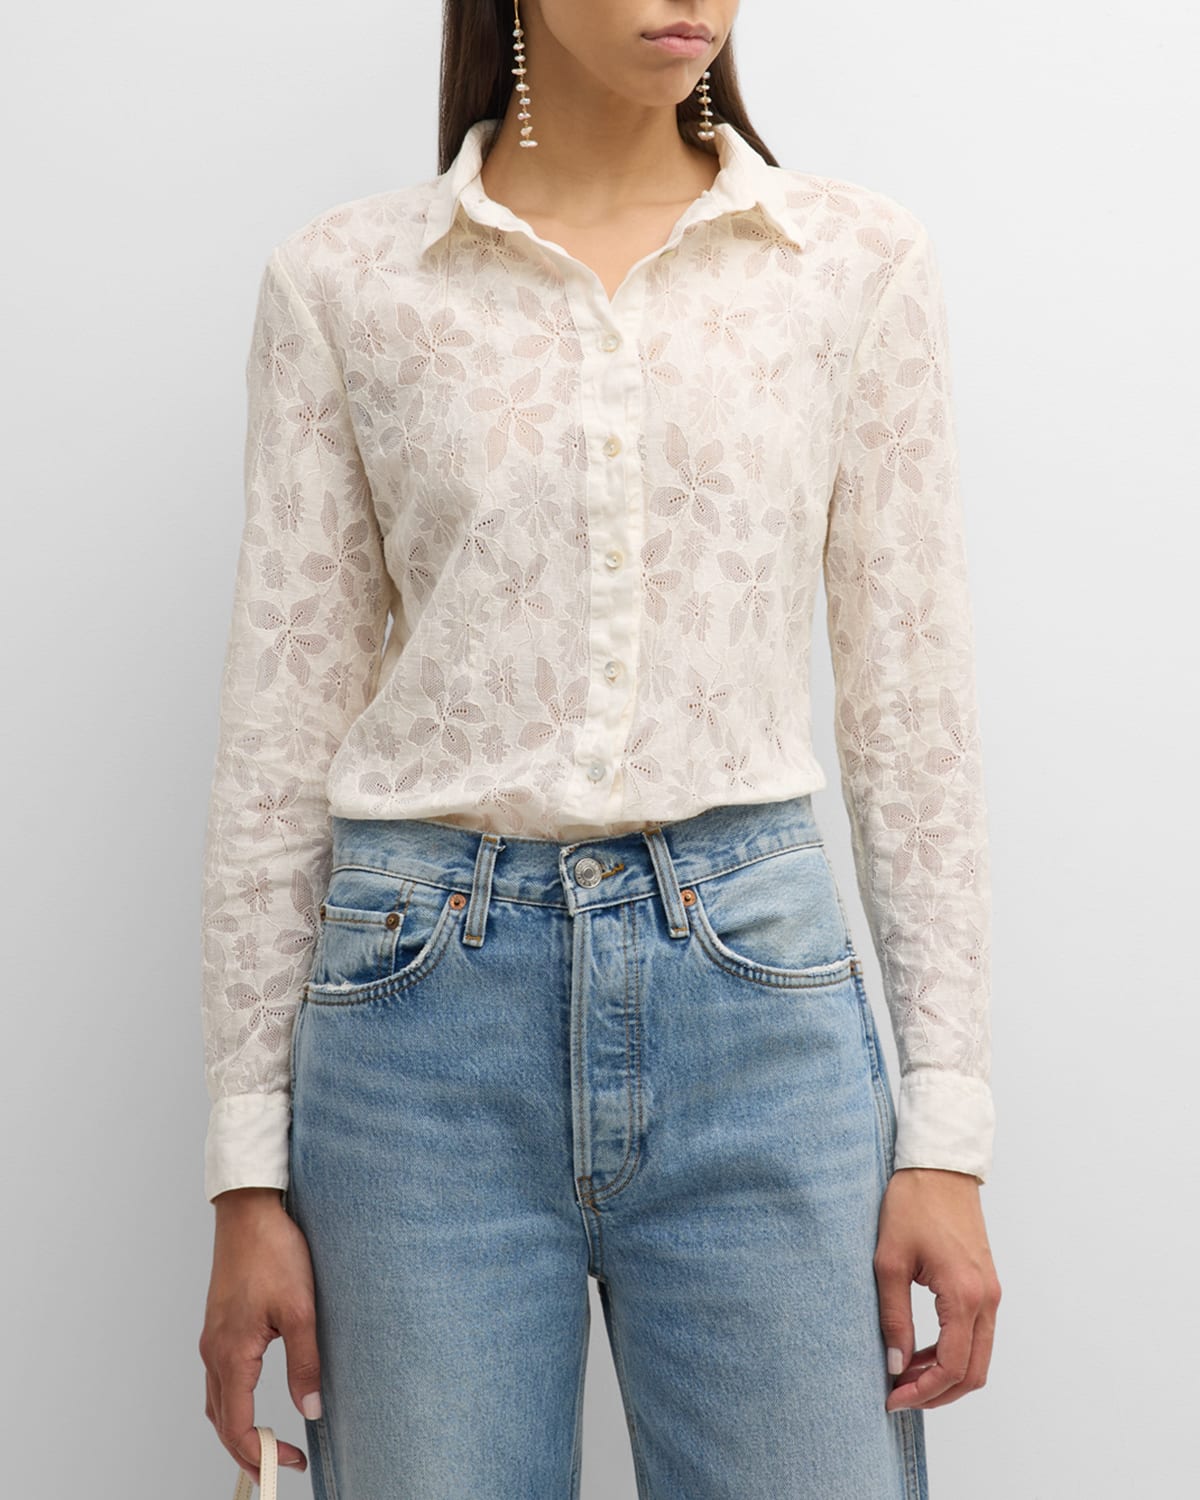 Scoop-Neck Floral Lace Tee